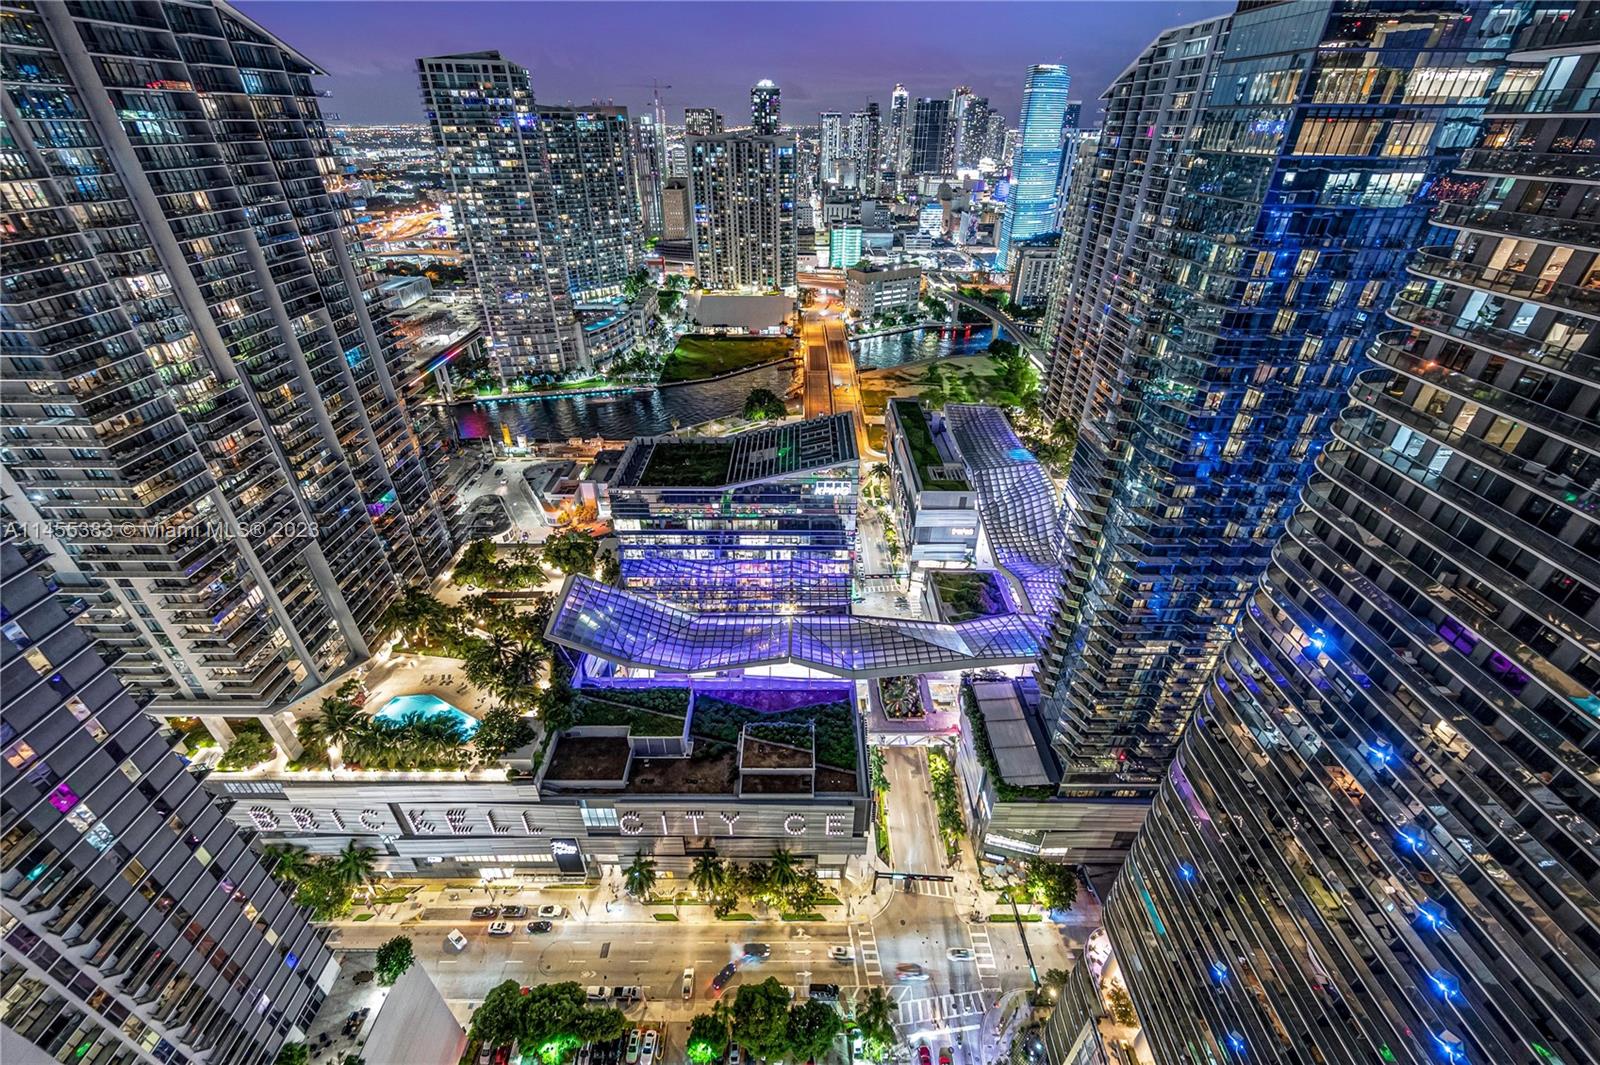 Brickell Heights East Tower image #38